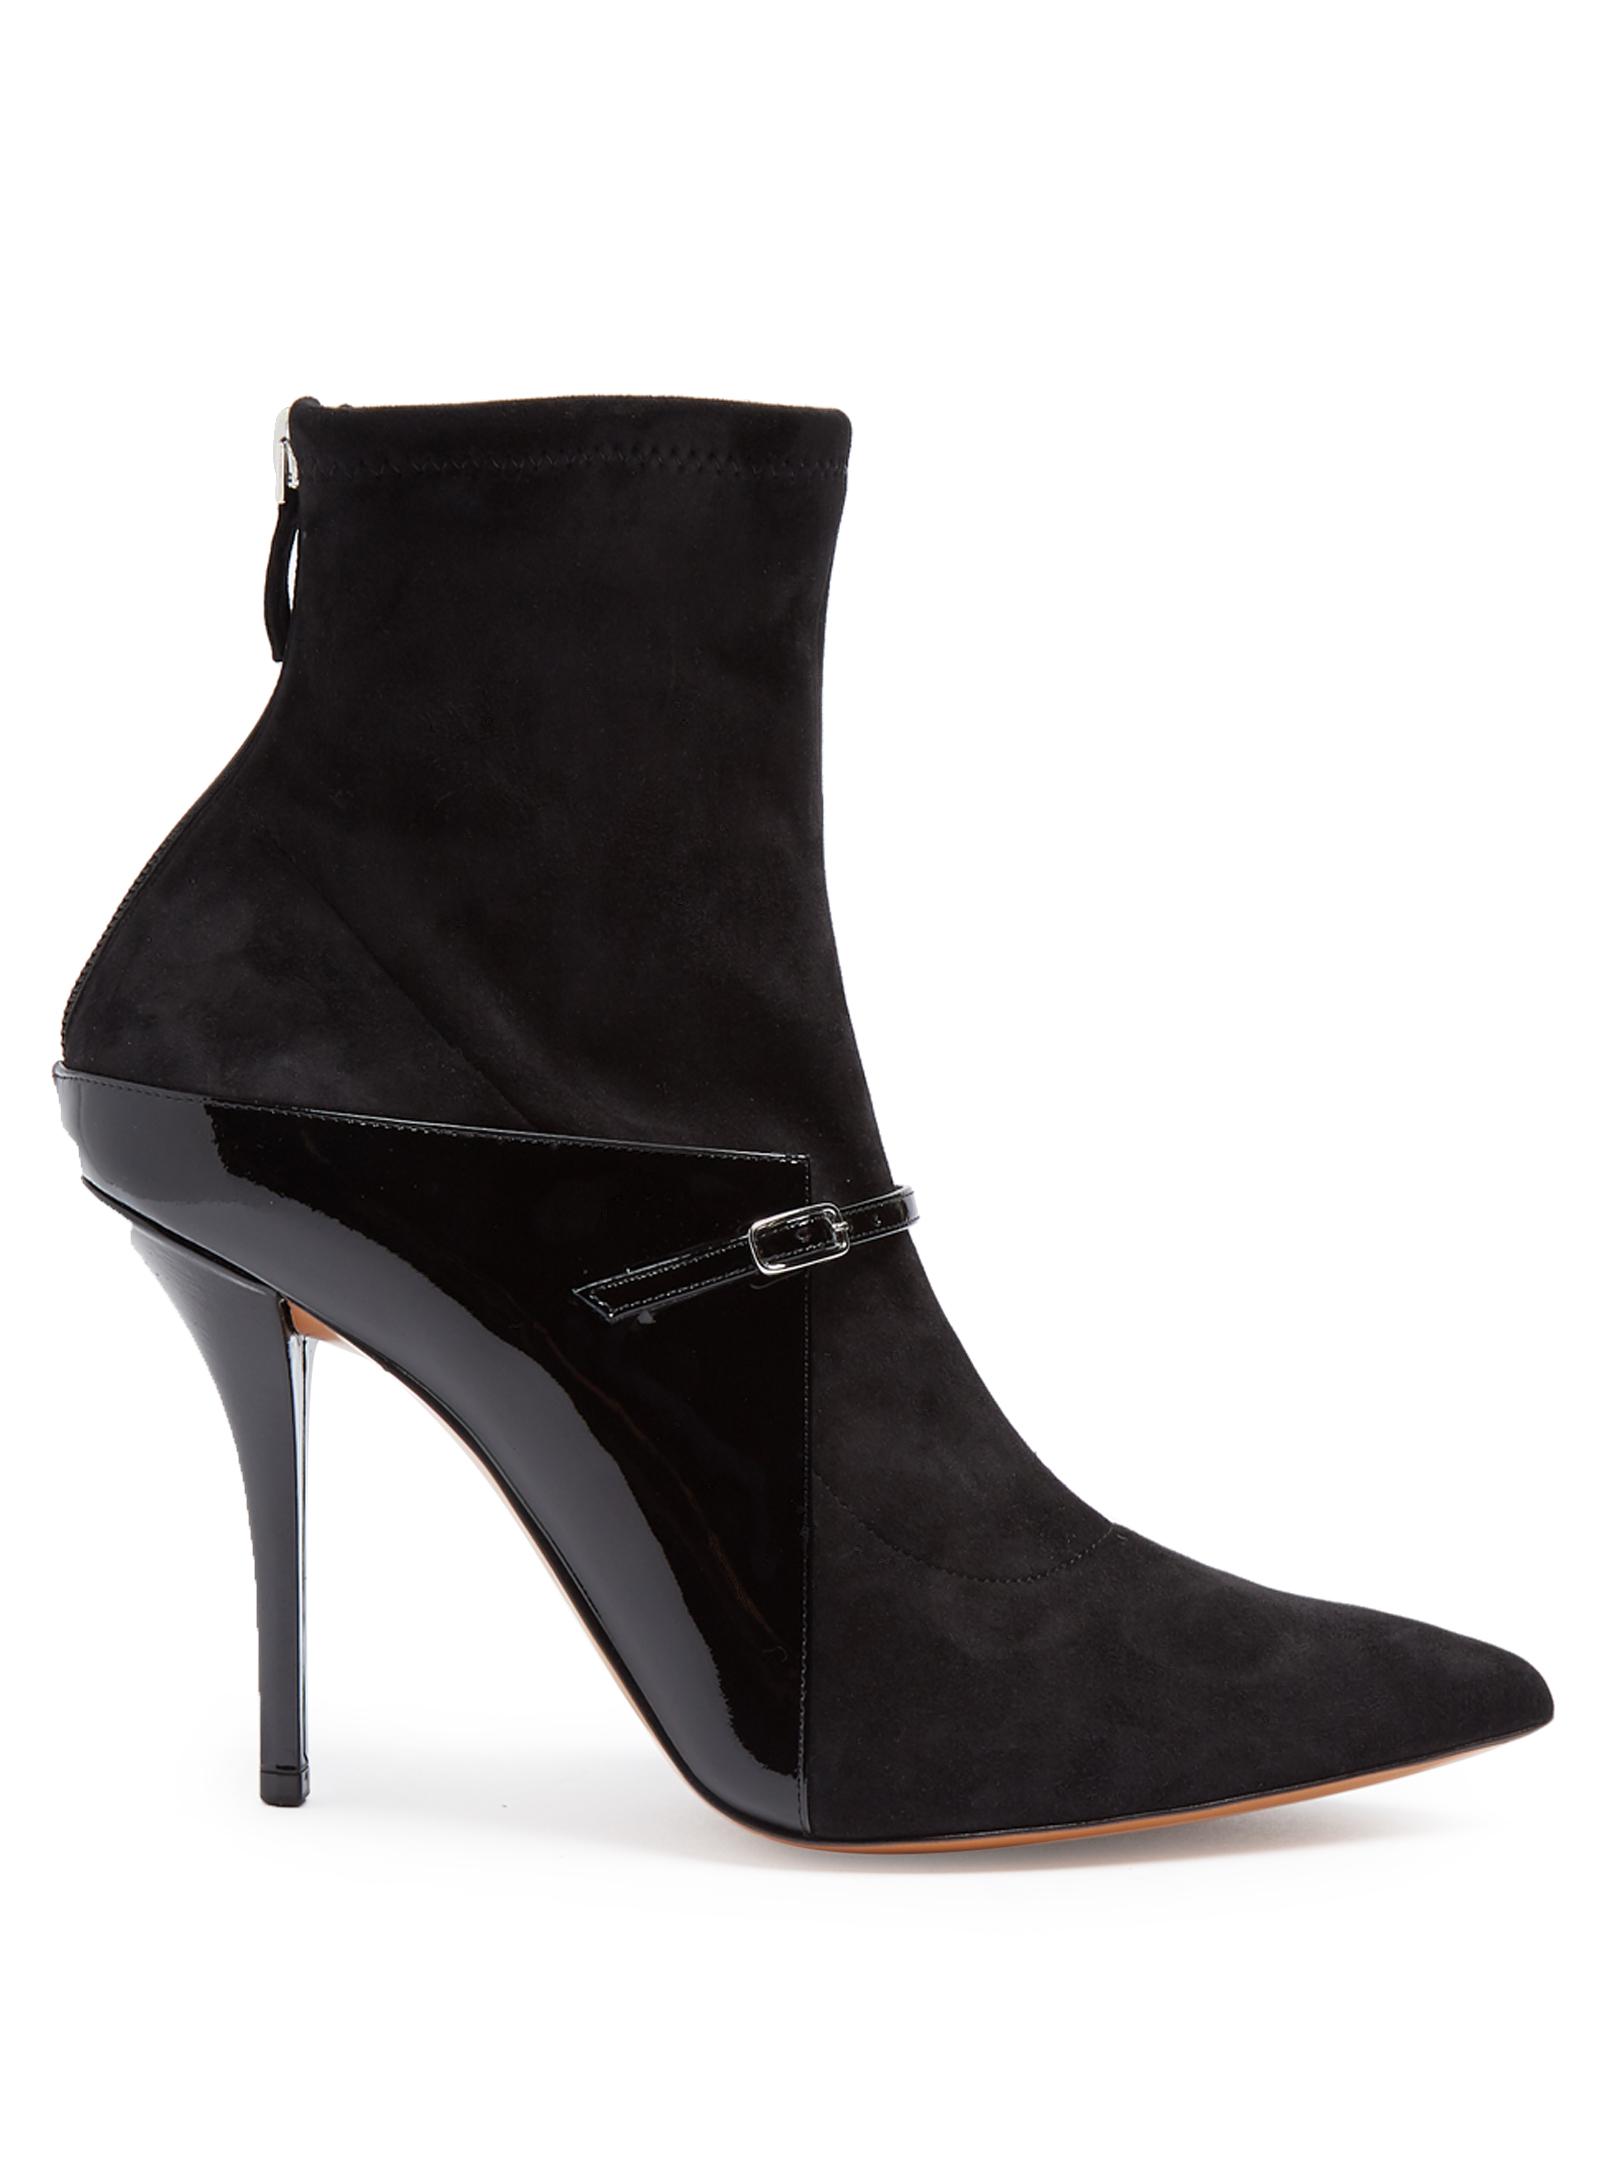 Lyst - Givenchy New Feminine Suede And Leather Ankle Boots in Black